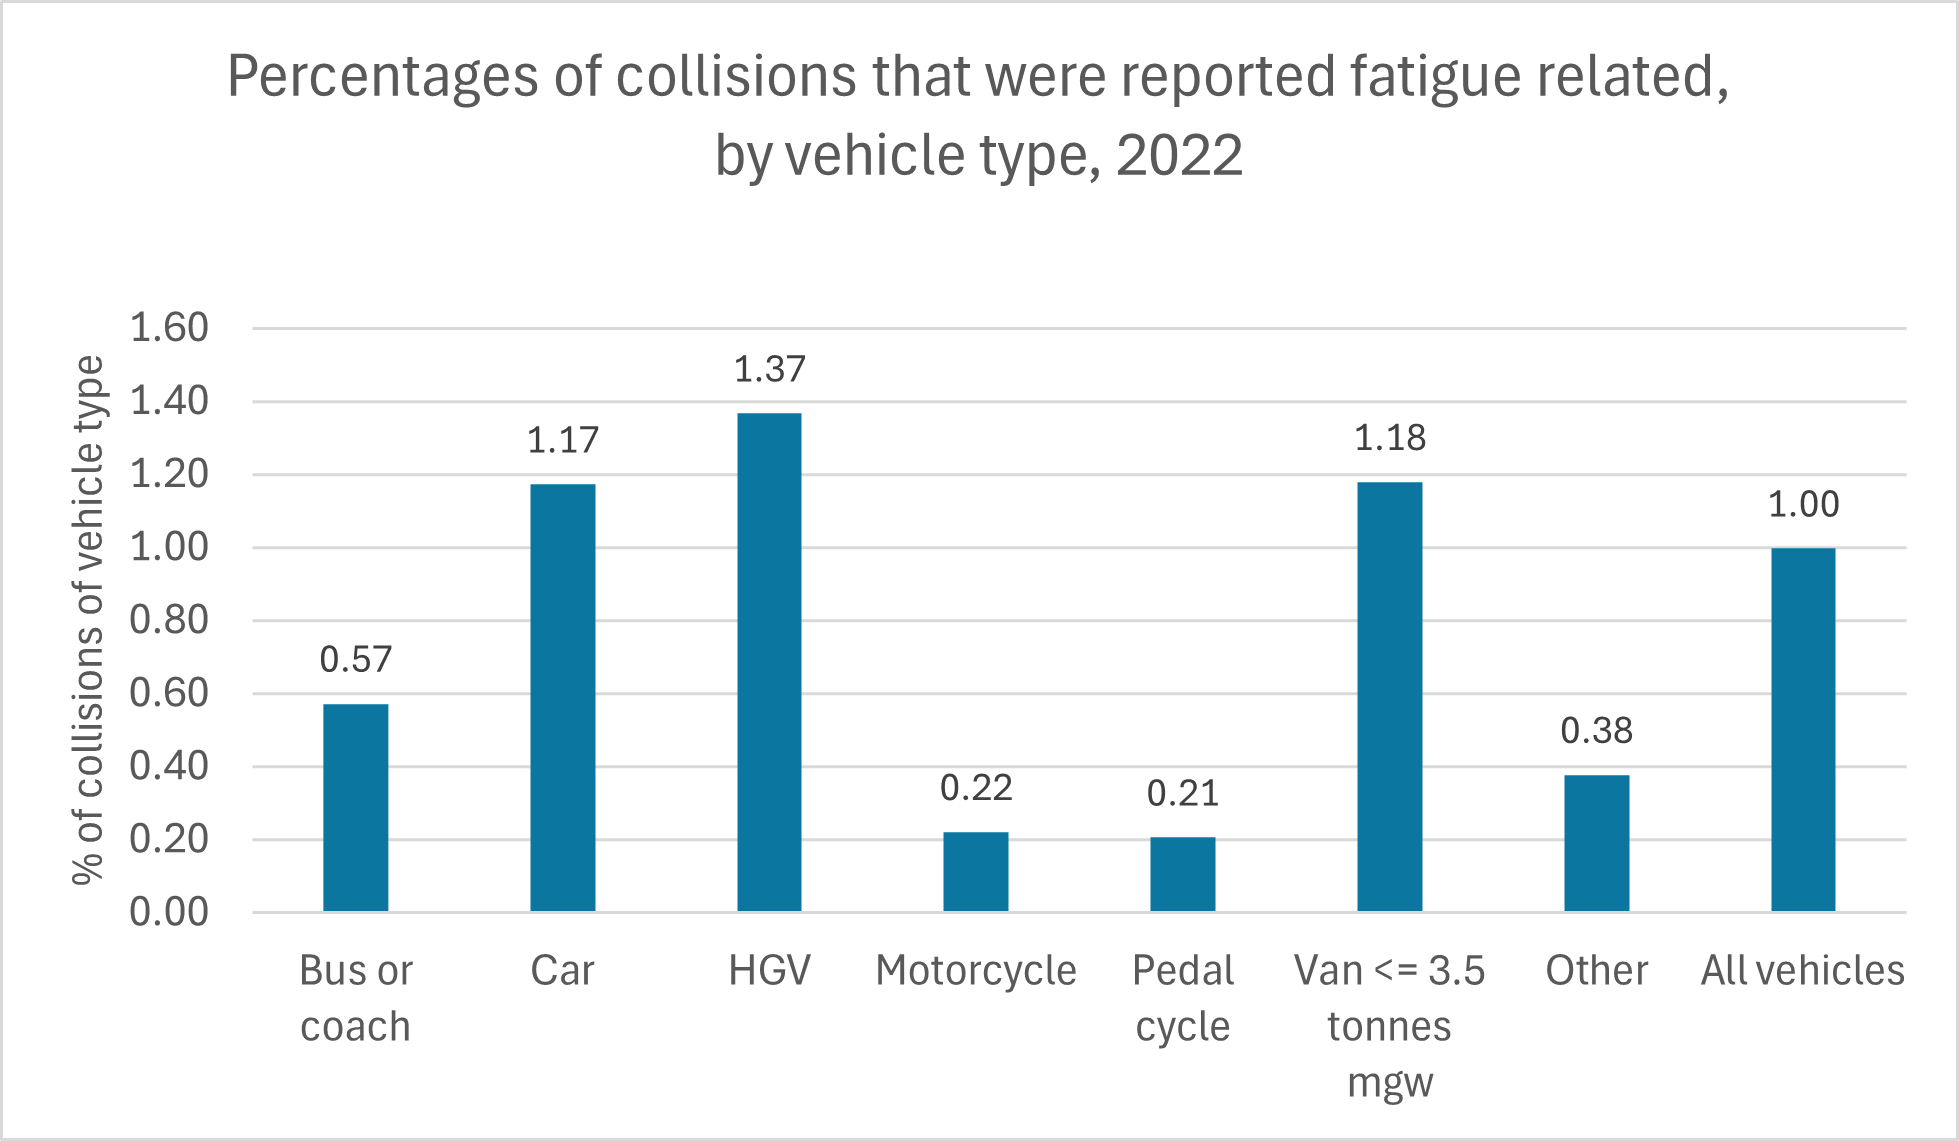 Fatiguer related collisions 2022